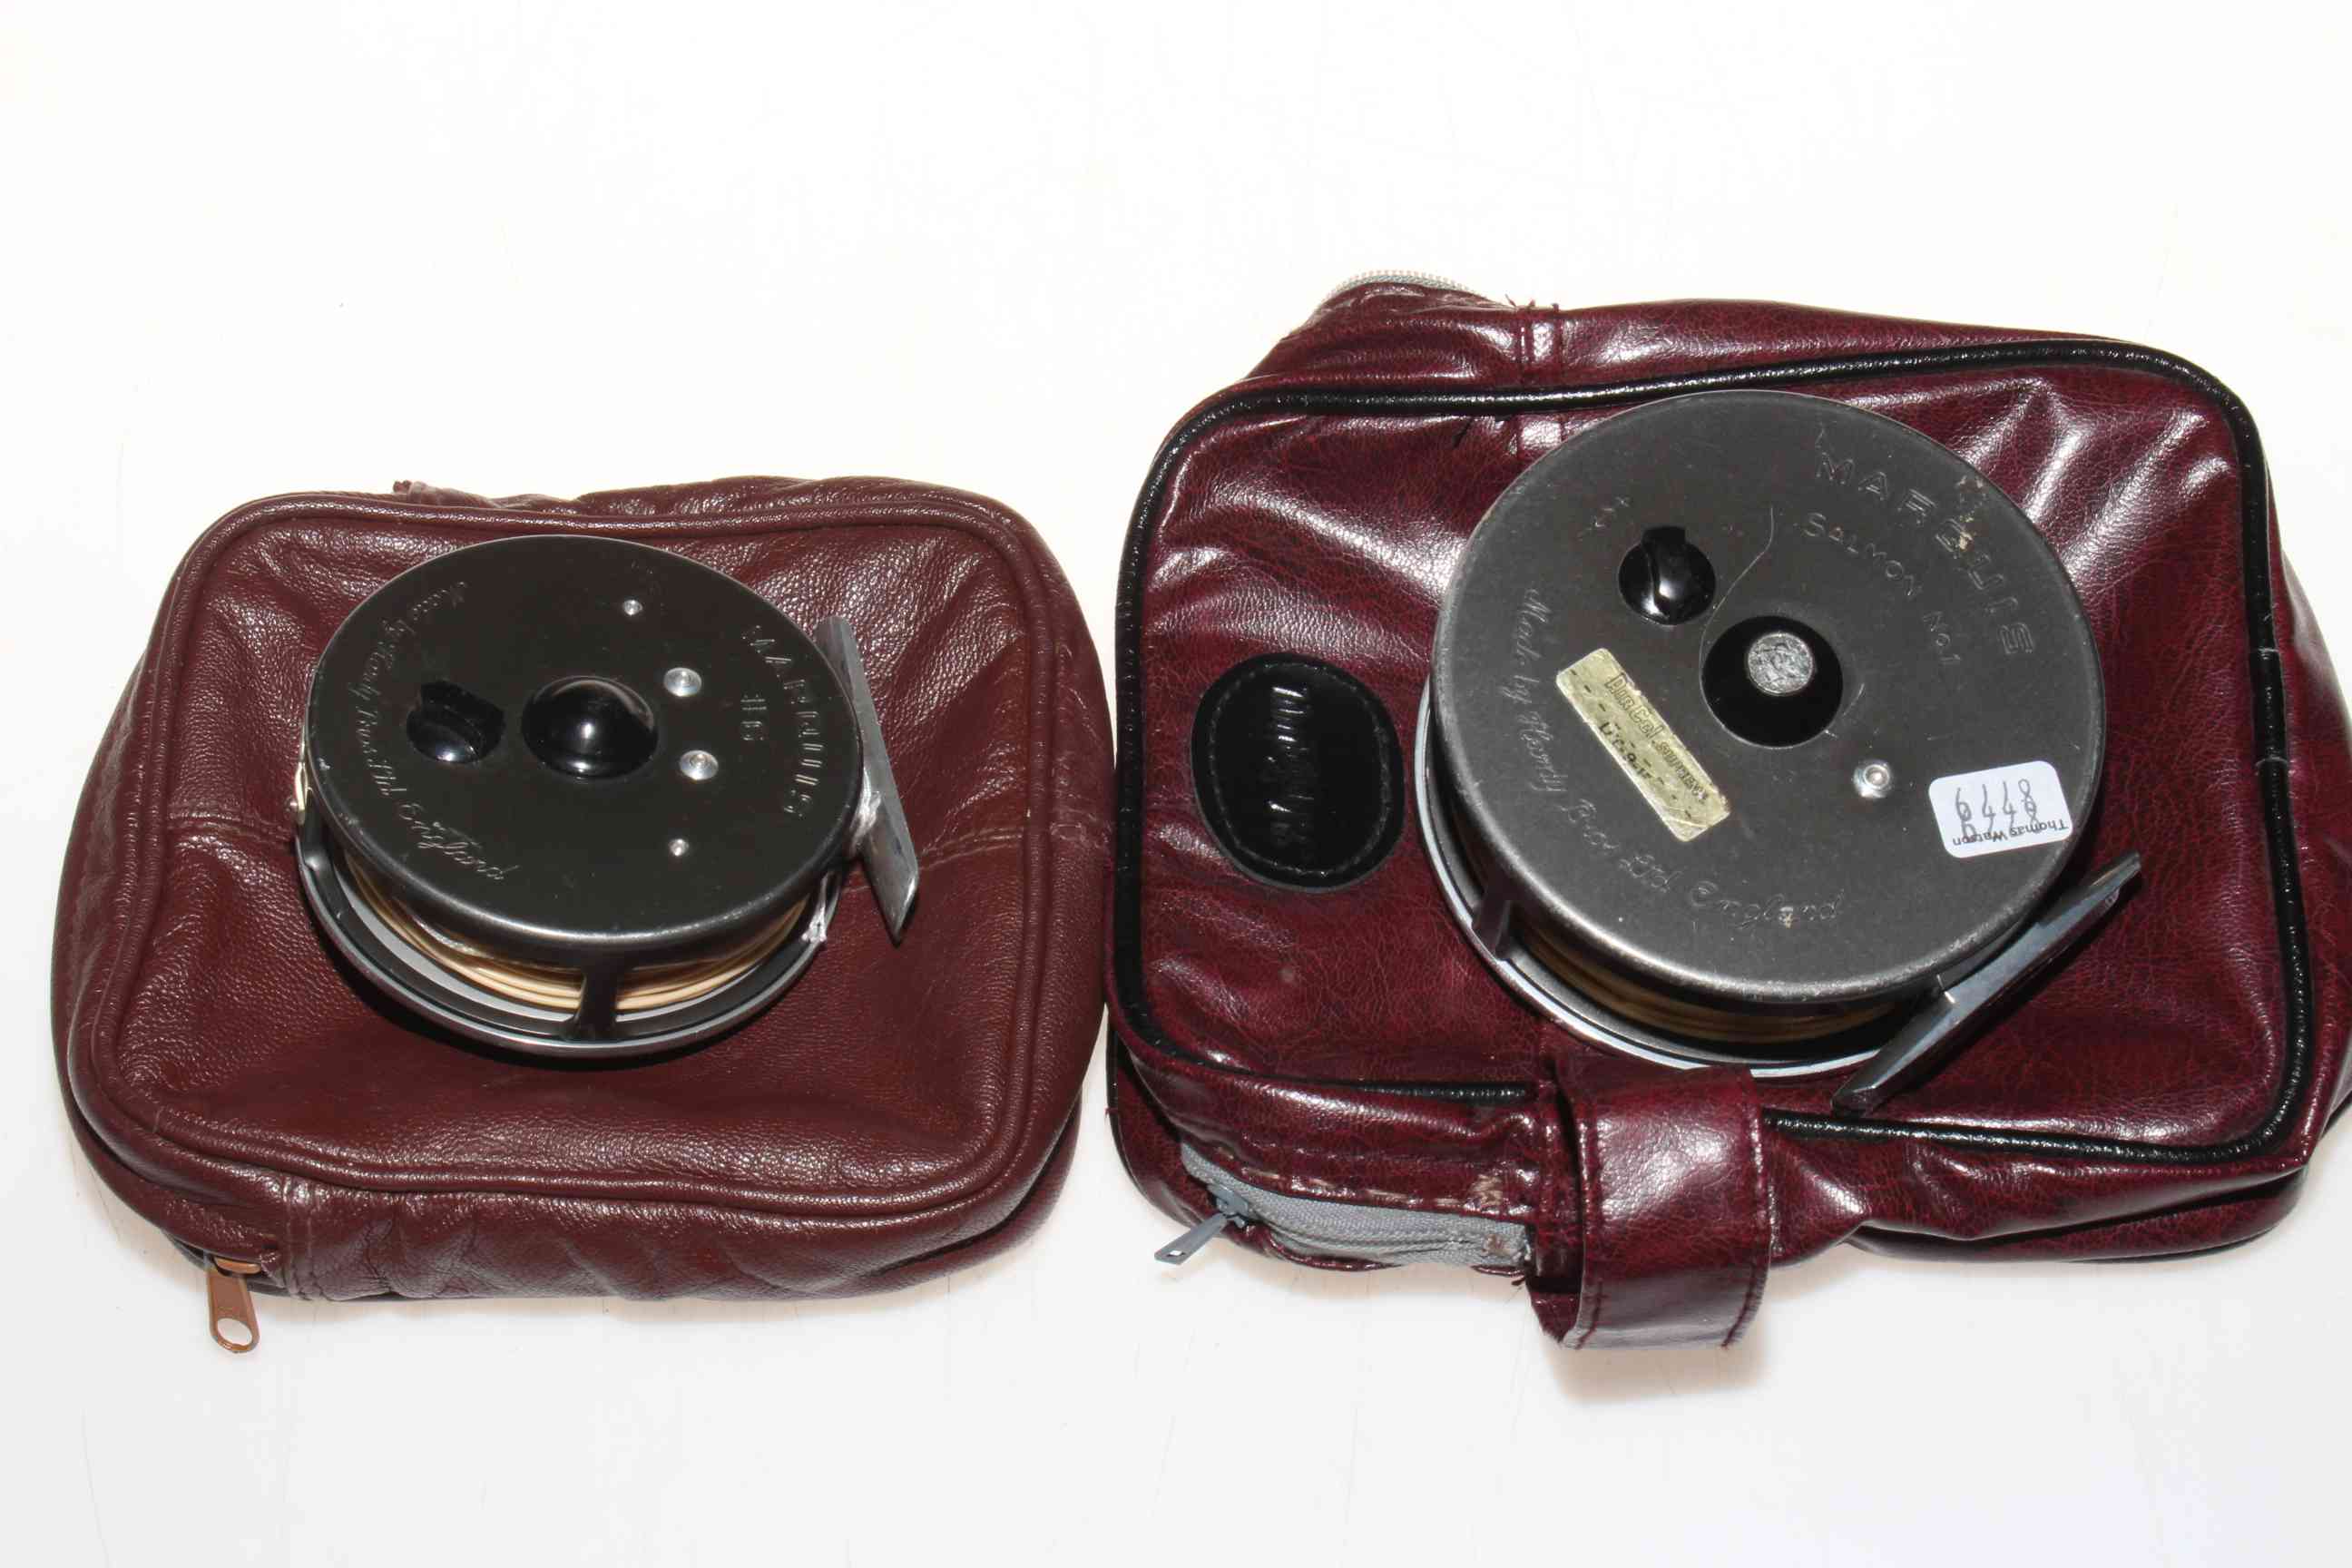 Two Hardy reels, Marquis Salmon No.1 and Marquis 6, with cases.